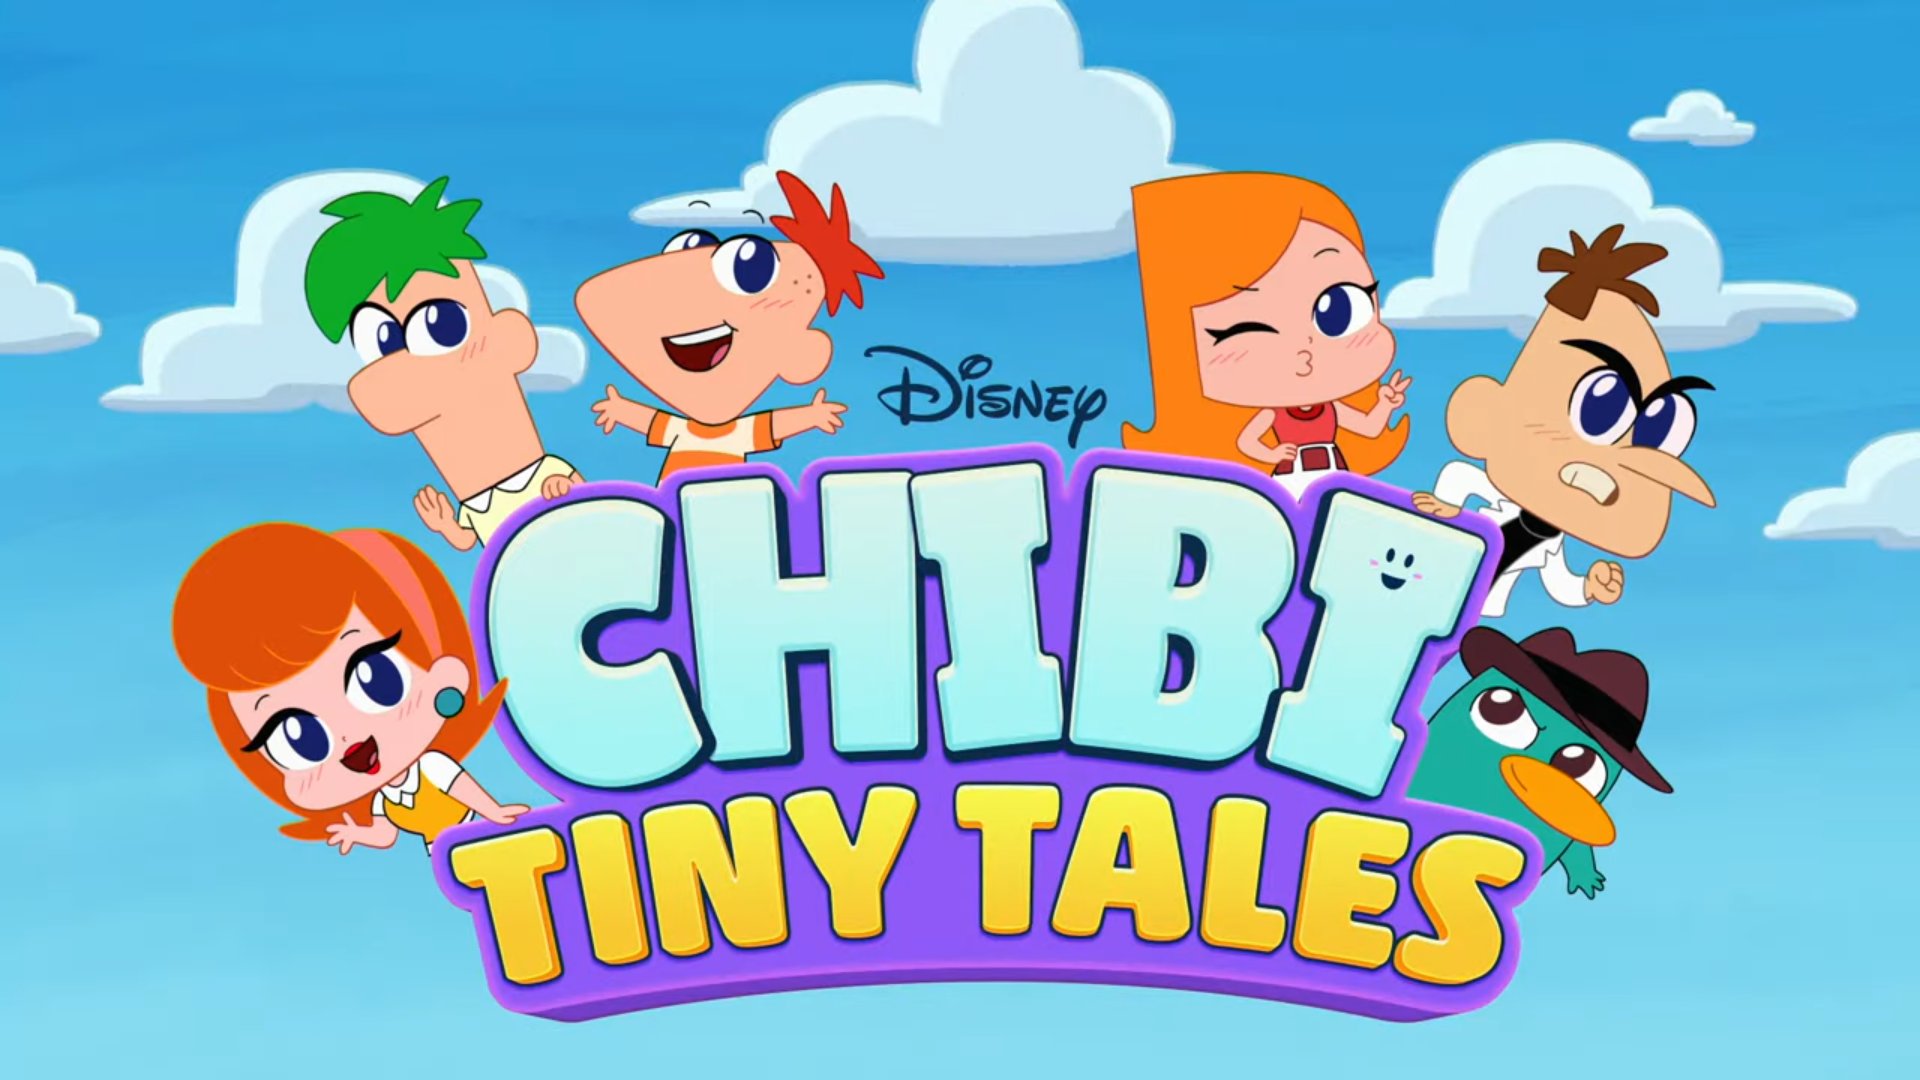 Hey it's Kyle - The chibi tiny Tales series are one minute shorts using various Disney properties. Aside from Phineas and Ferb, Amphibia and Big Hero 6 have these shorts